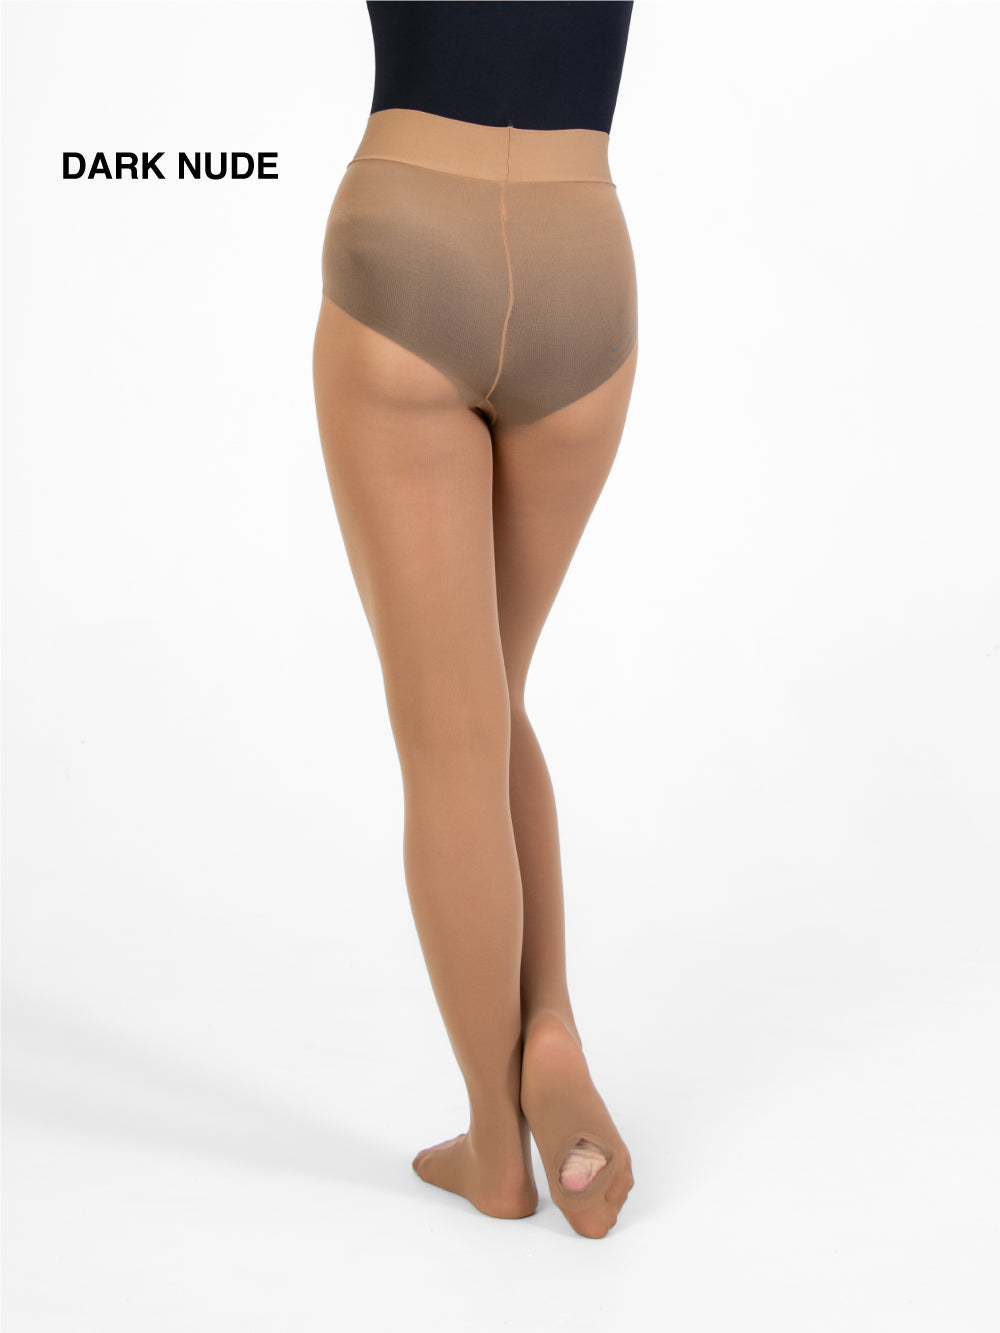 Tightspot Dancewear Ctr - $34.99 clear or nude strap & and clear